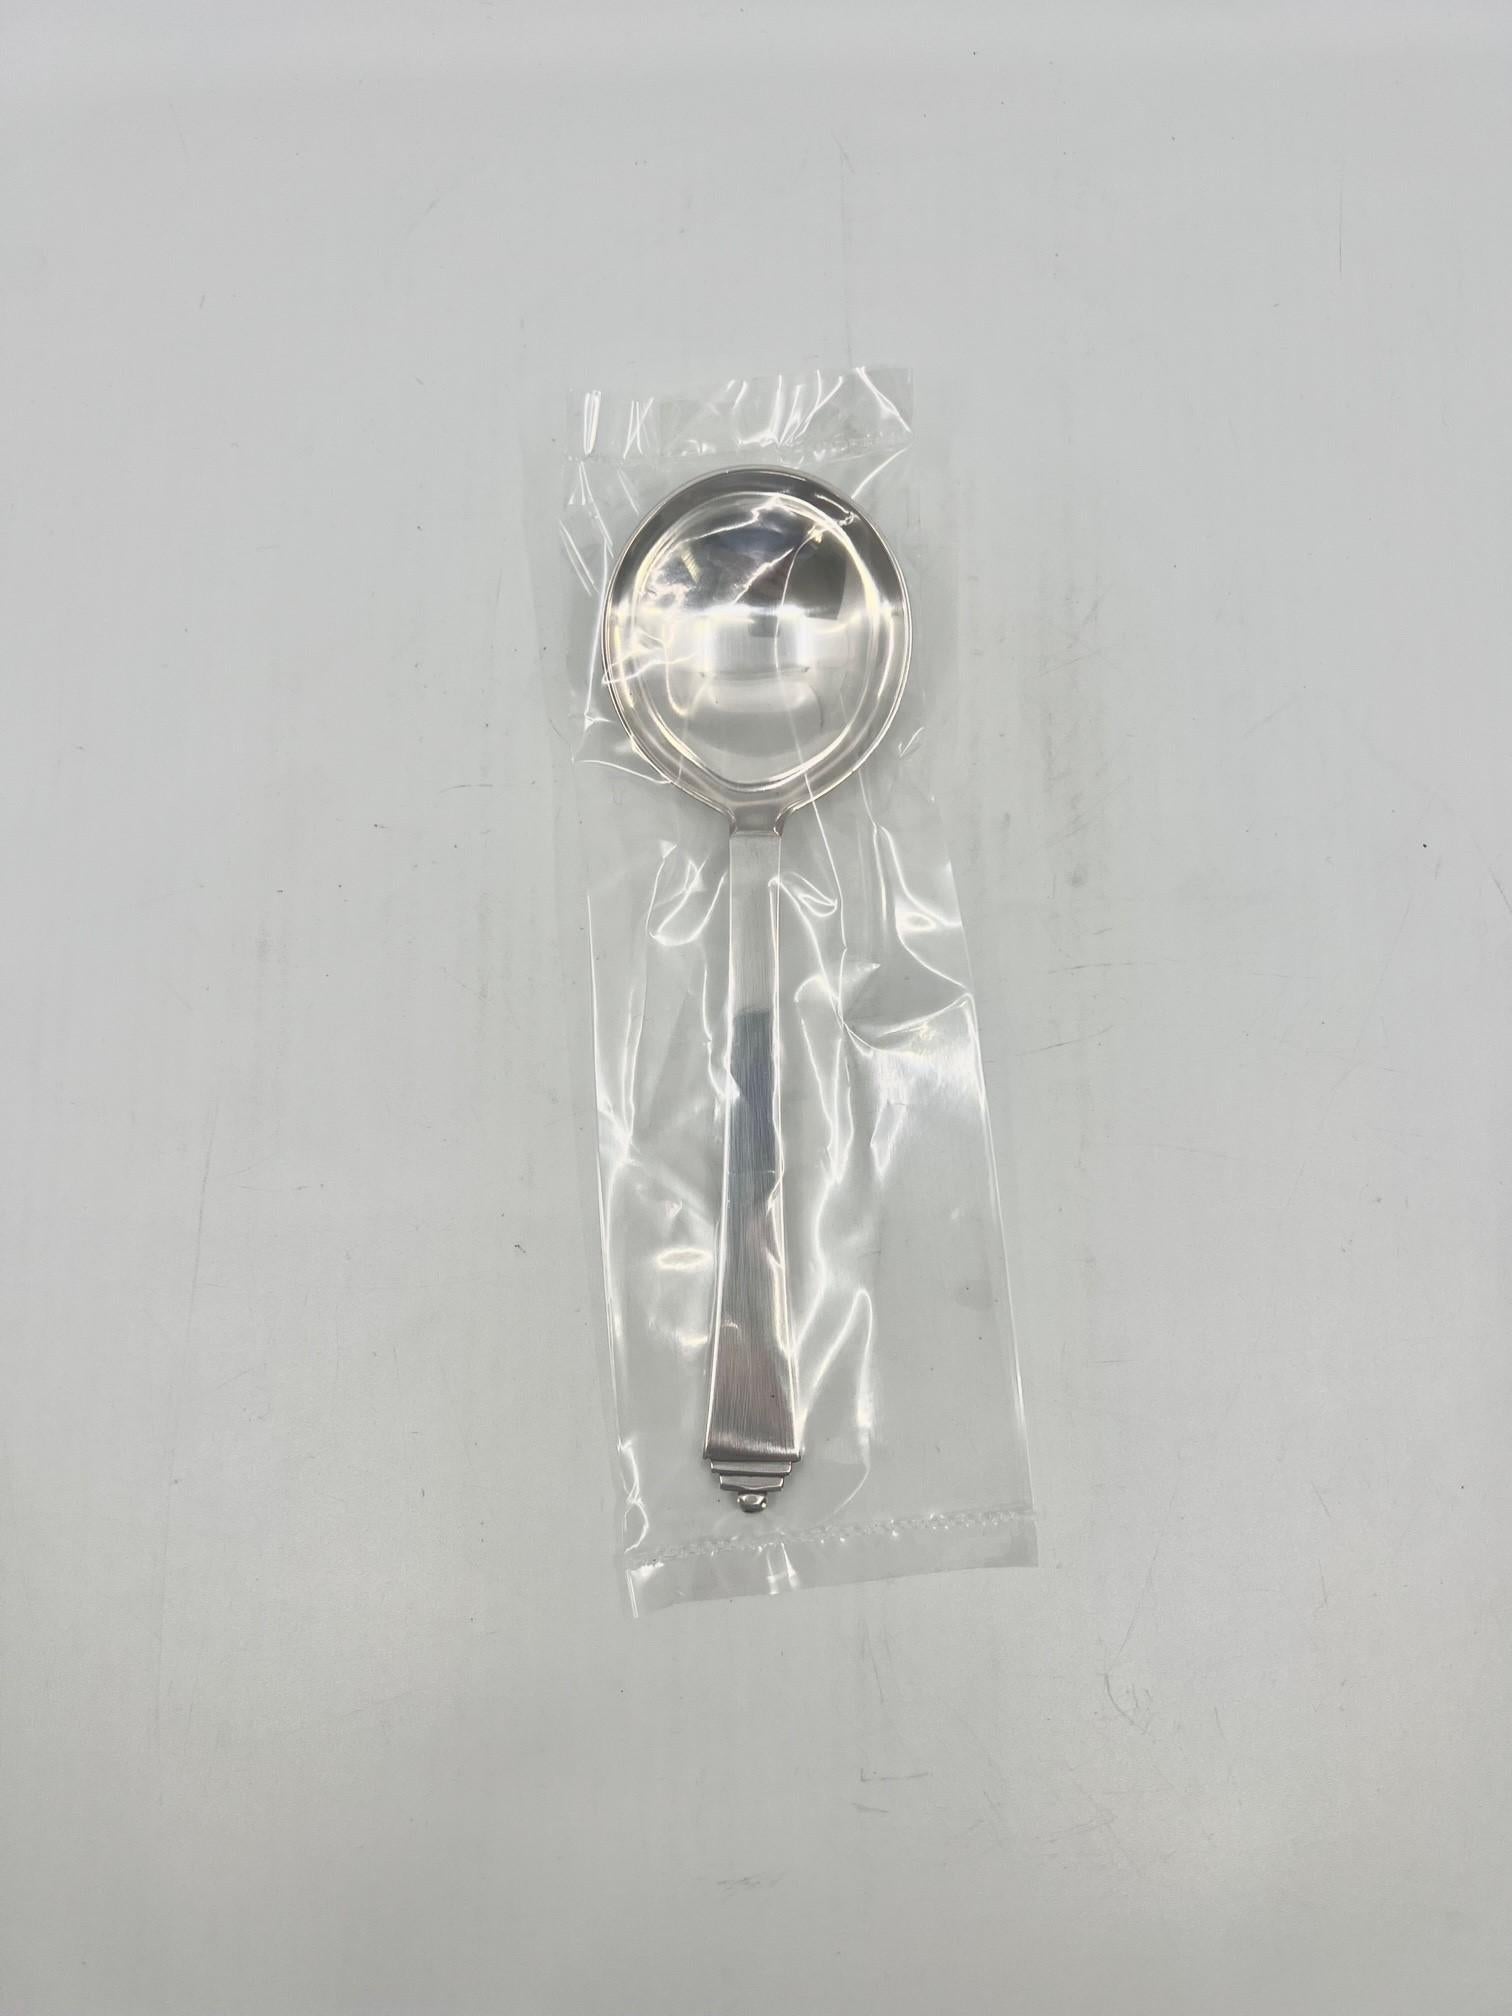 A sterling silver Georg Jensen bouillon spoon, item #053 in the Pyramid pattern, design #15 by Harald Nielsen from 1926. These spoons are no longer produced.

Additional information:
Material: Sterling silver
Styles: Art Deco
Hallmarks: With post